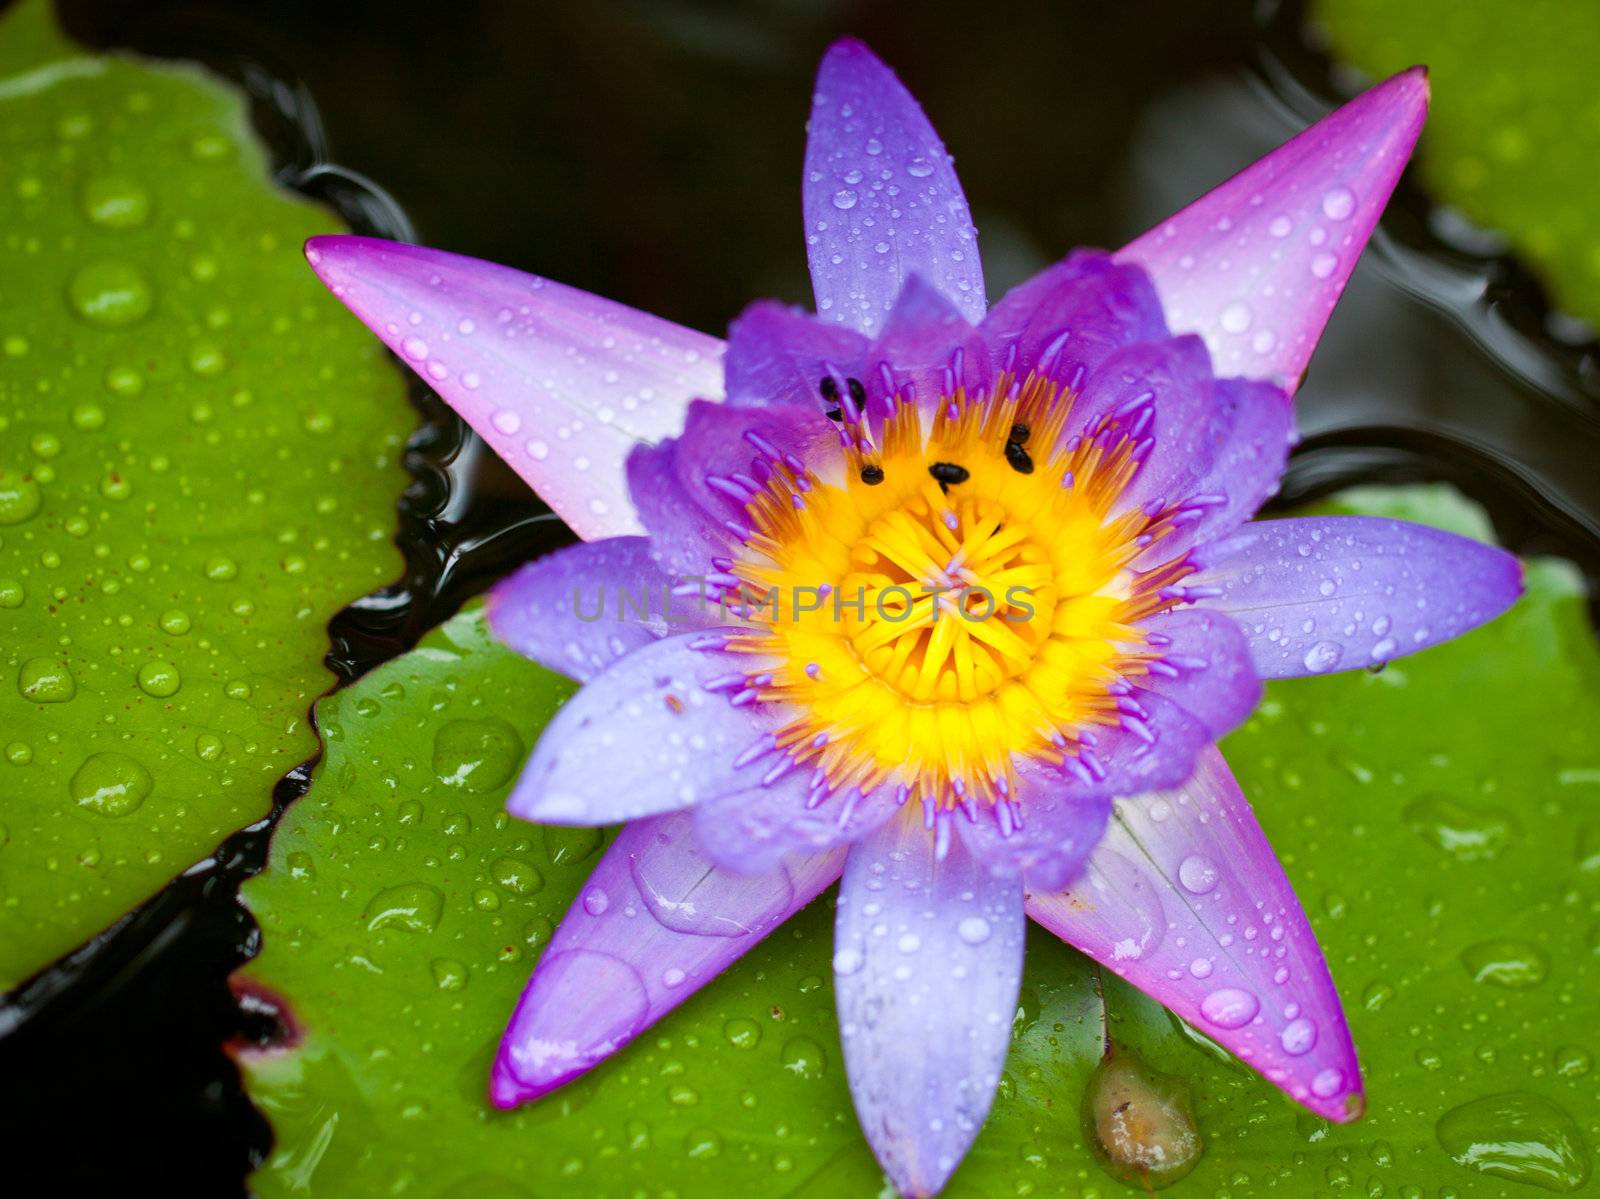 A closeup shot of a beautiful lotus flower or waterlily with lush green leaves in a pond